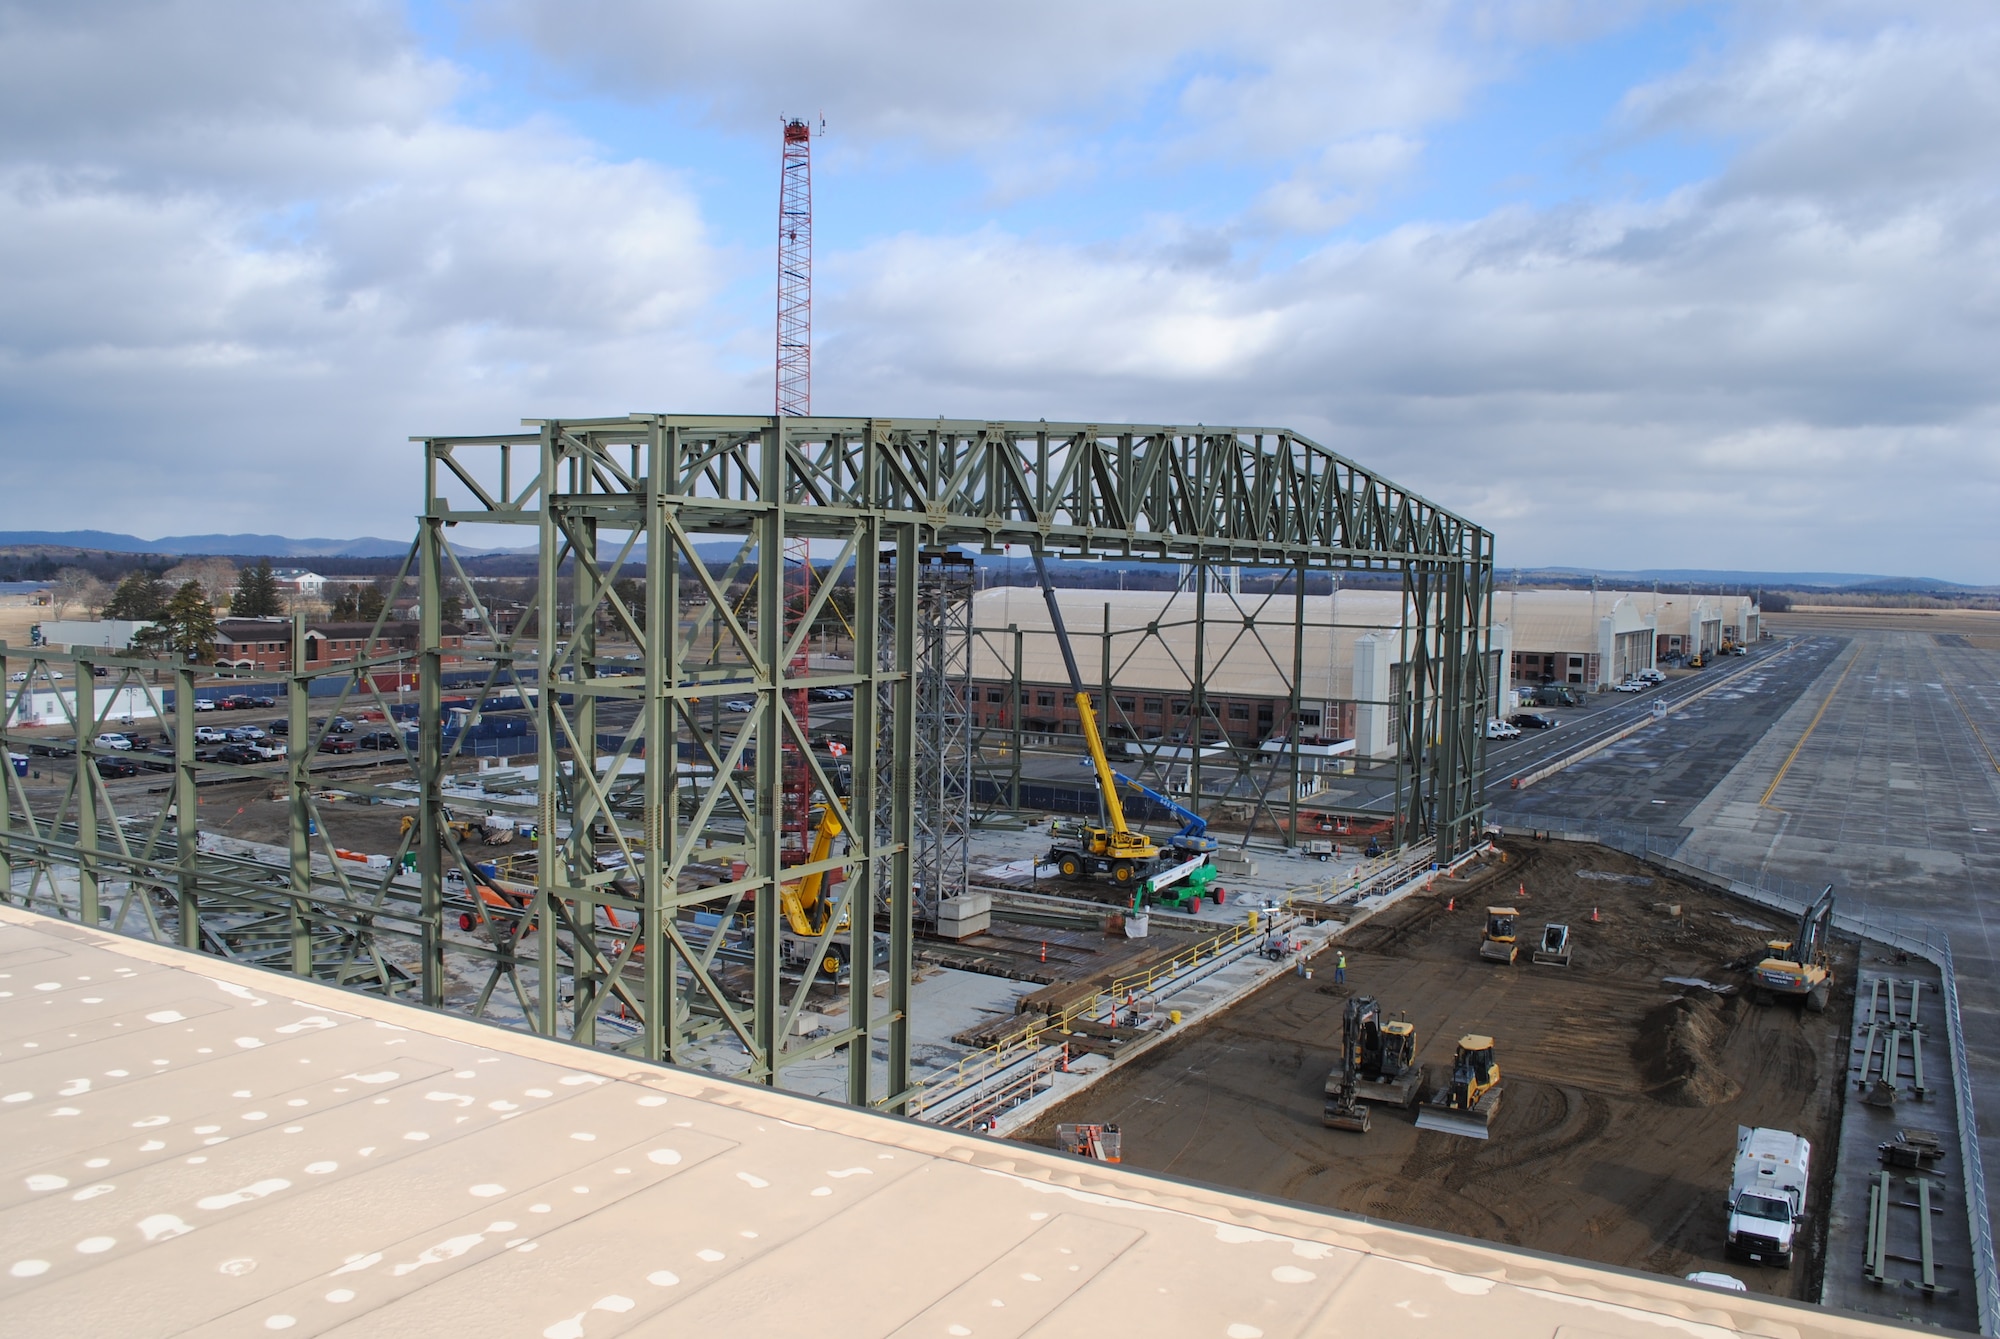 Westover’s newest hangar rises above the old